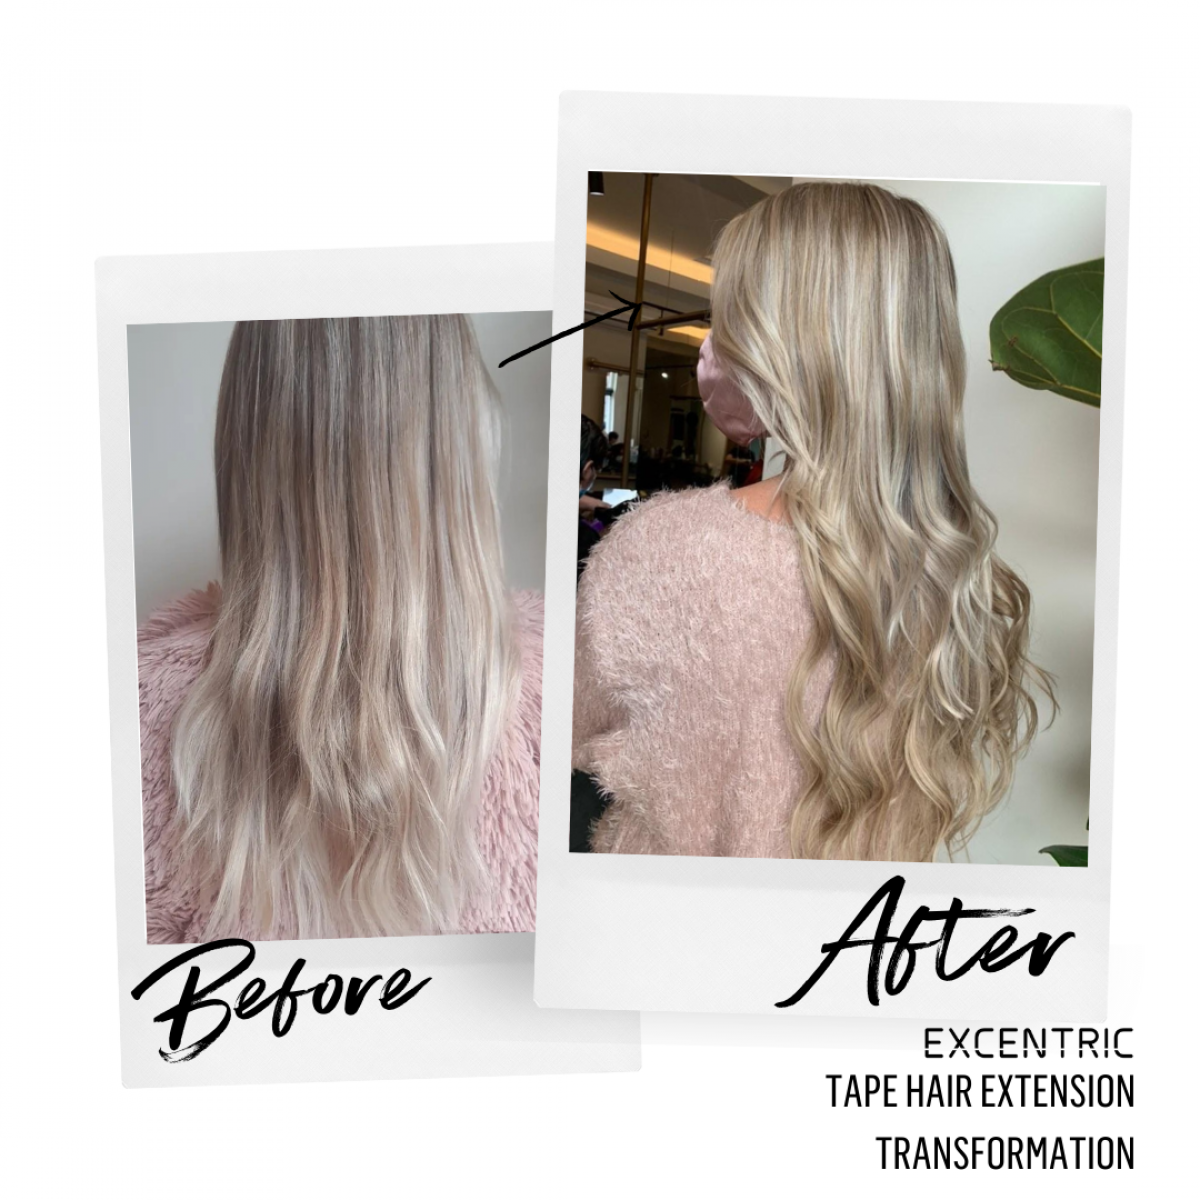 Are you looking for Cape Town's best hair extensions?